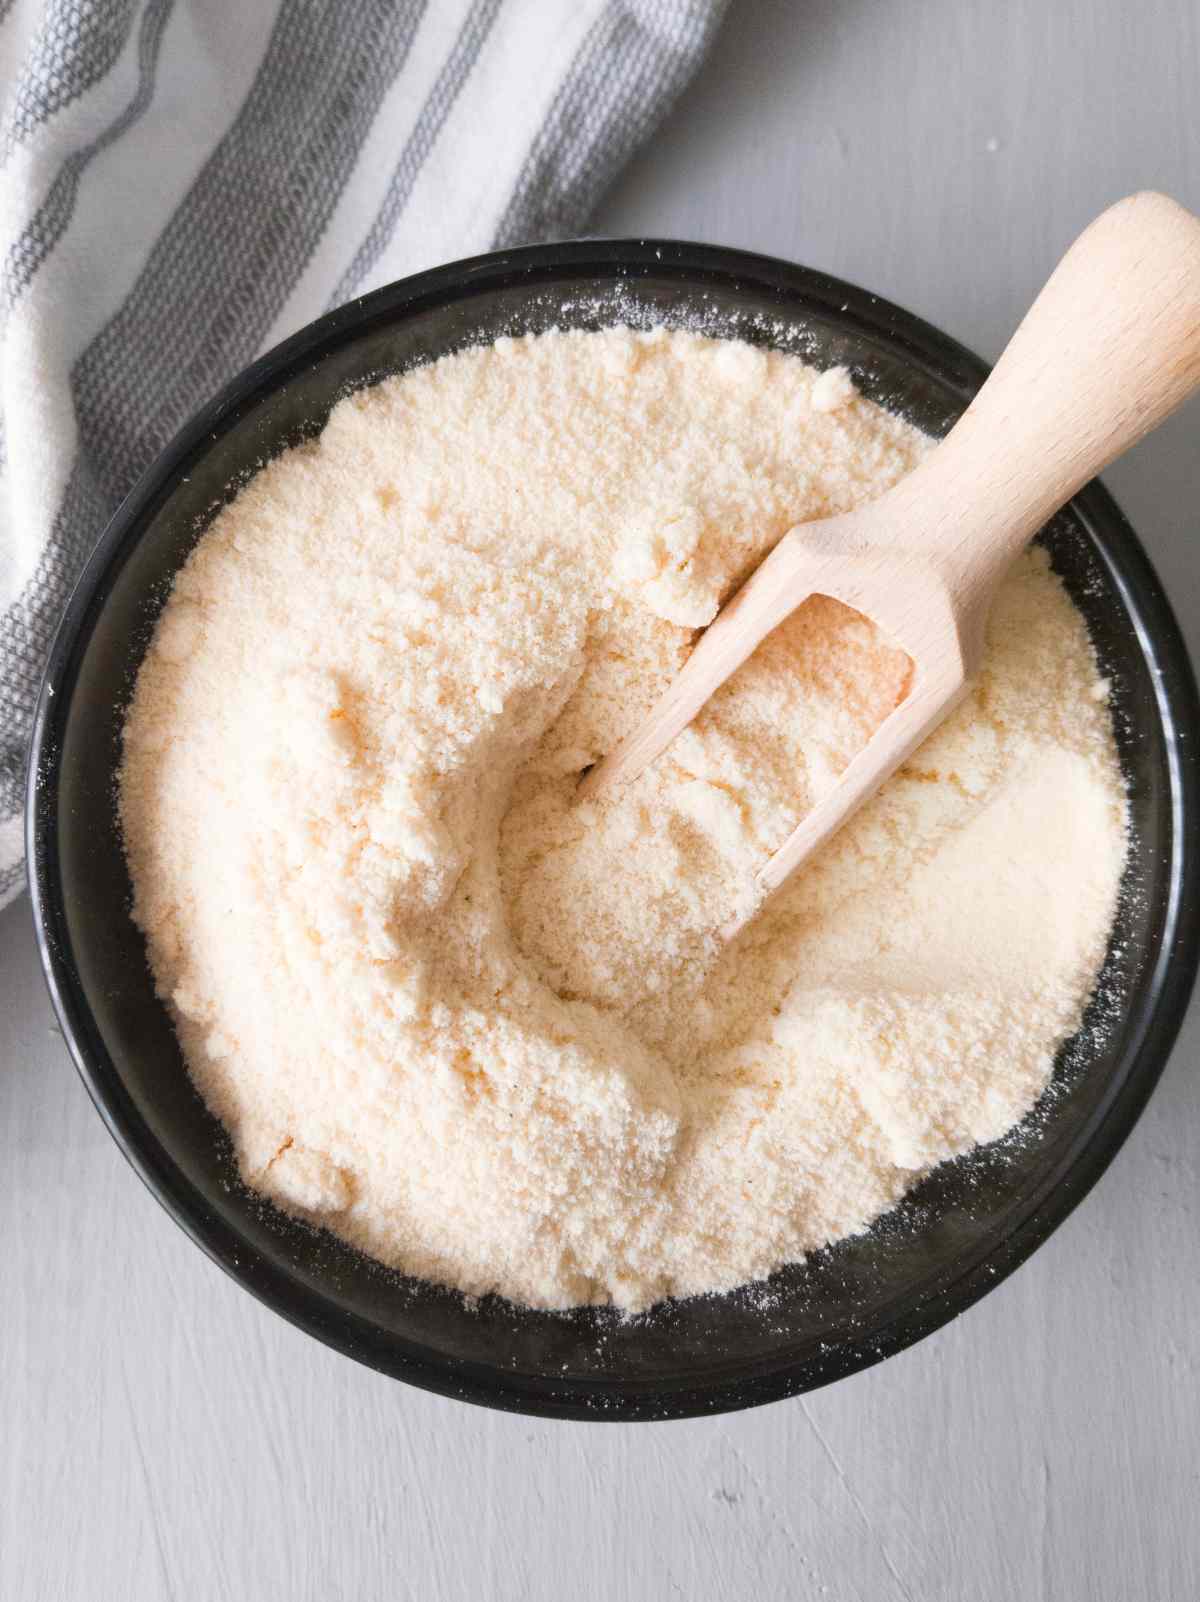 Coconut flour in a black bowl with a wooden spoon in it on a gray surface.